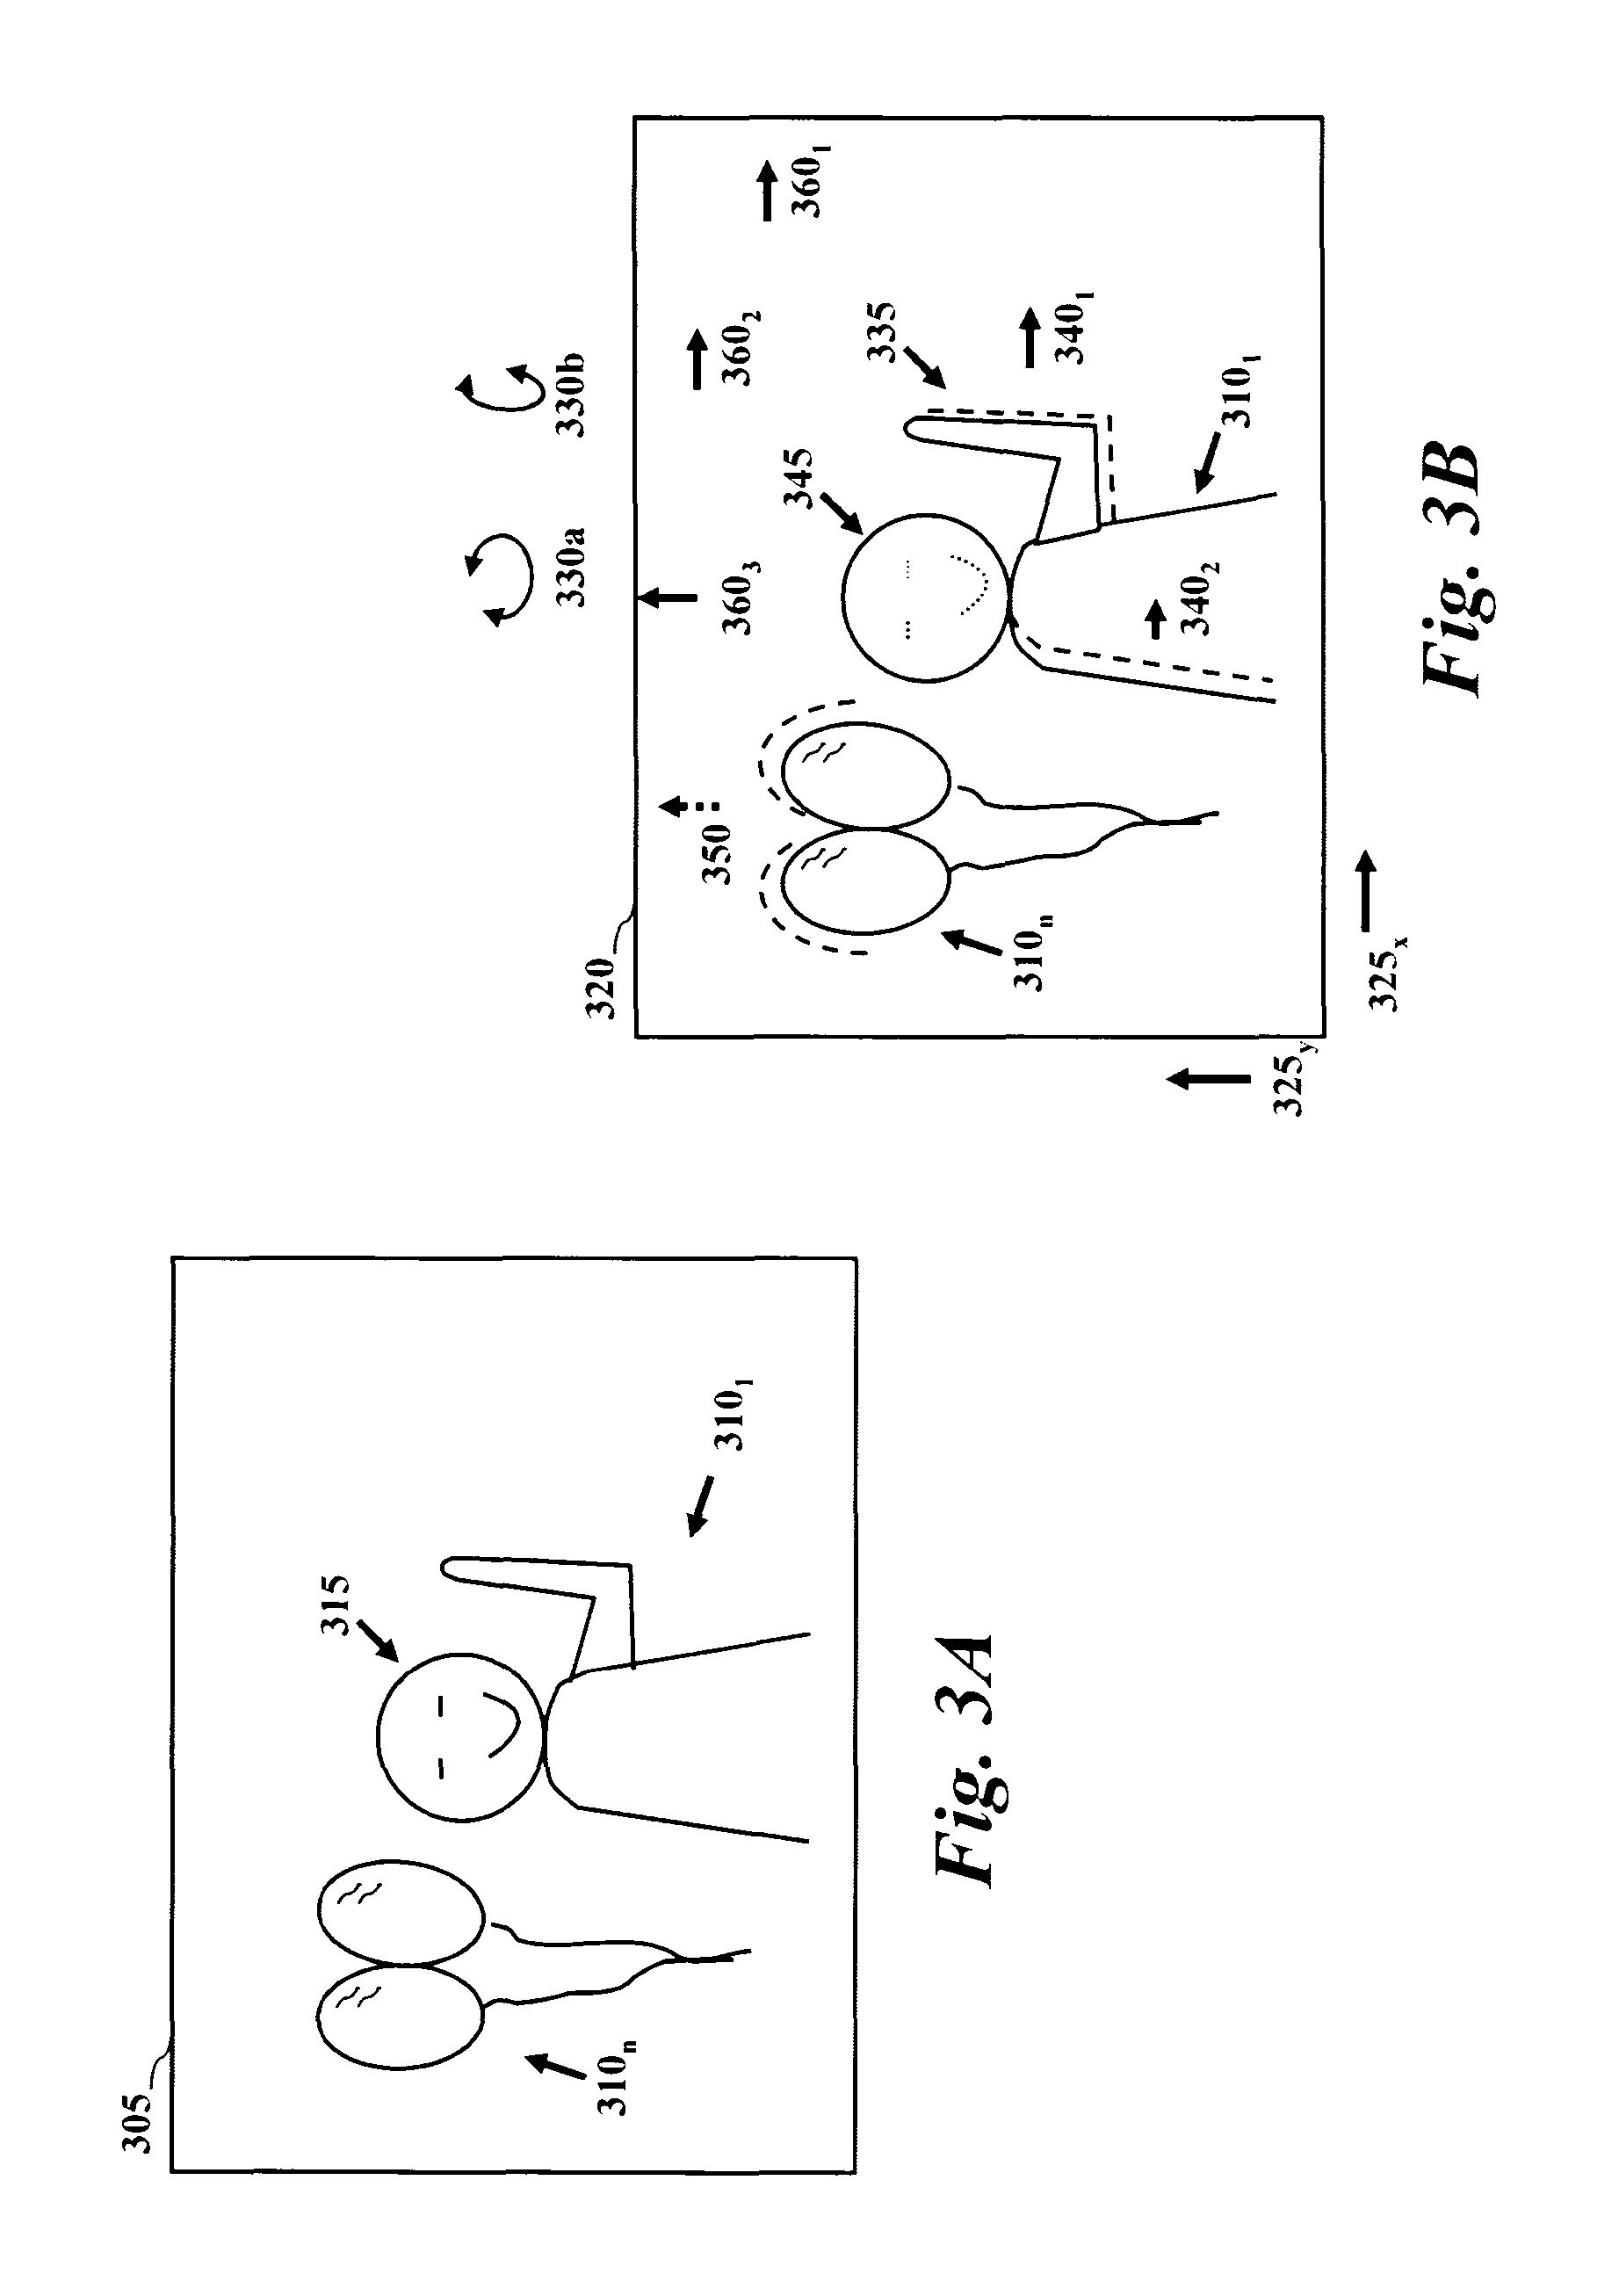 Method and apparatus for image stabilization